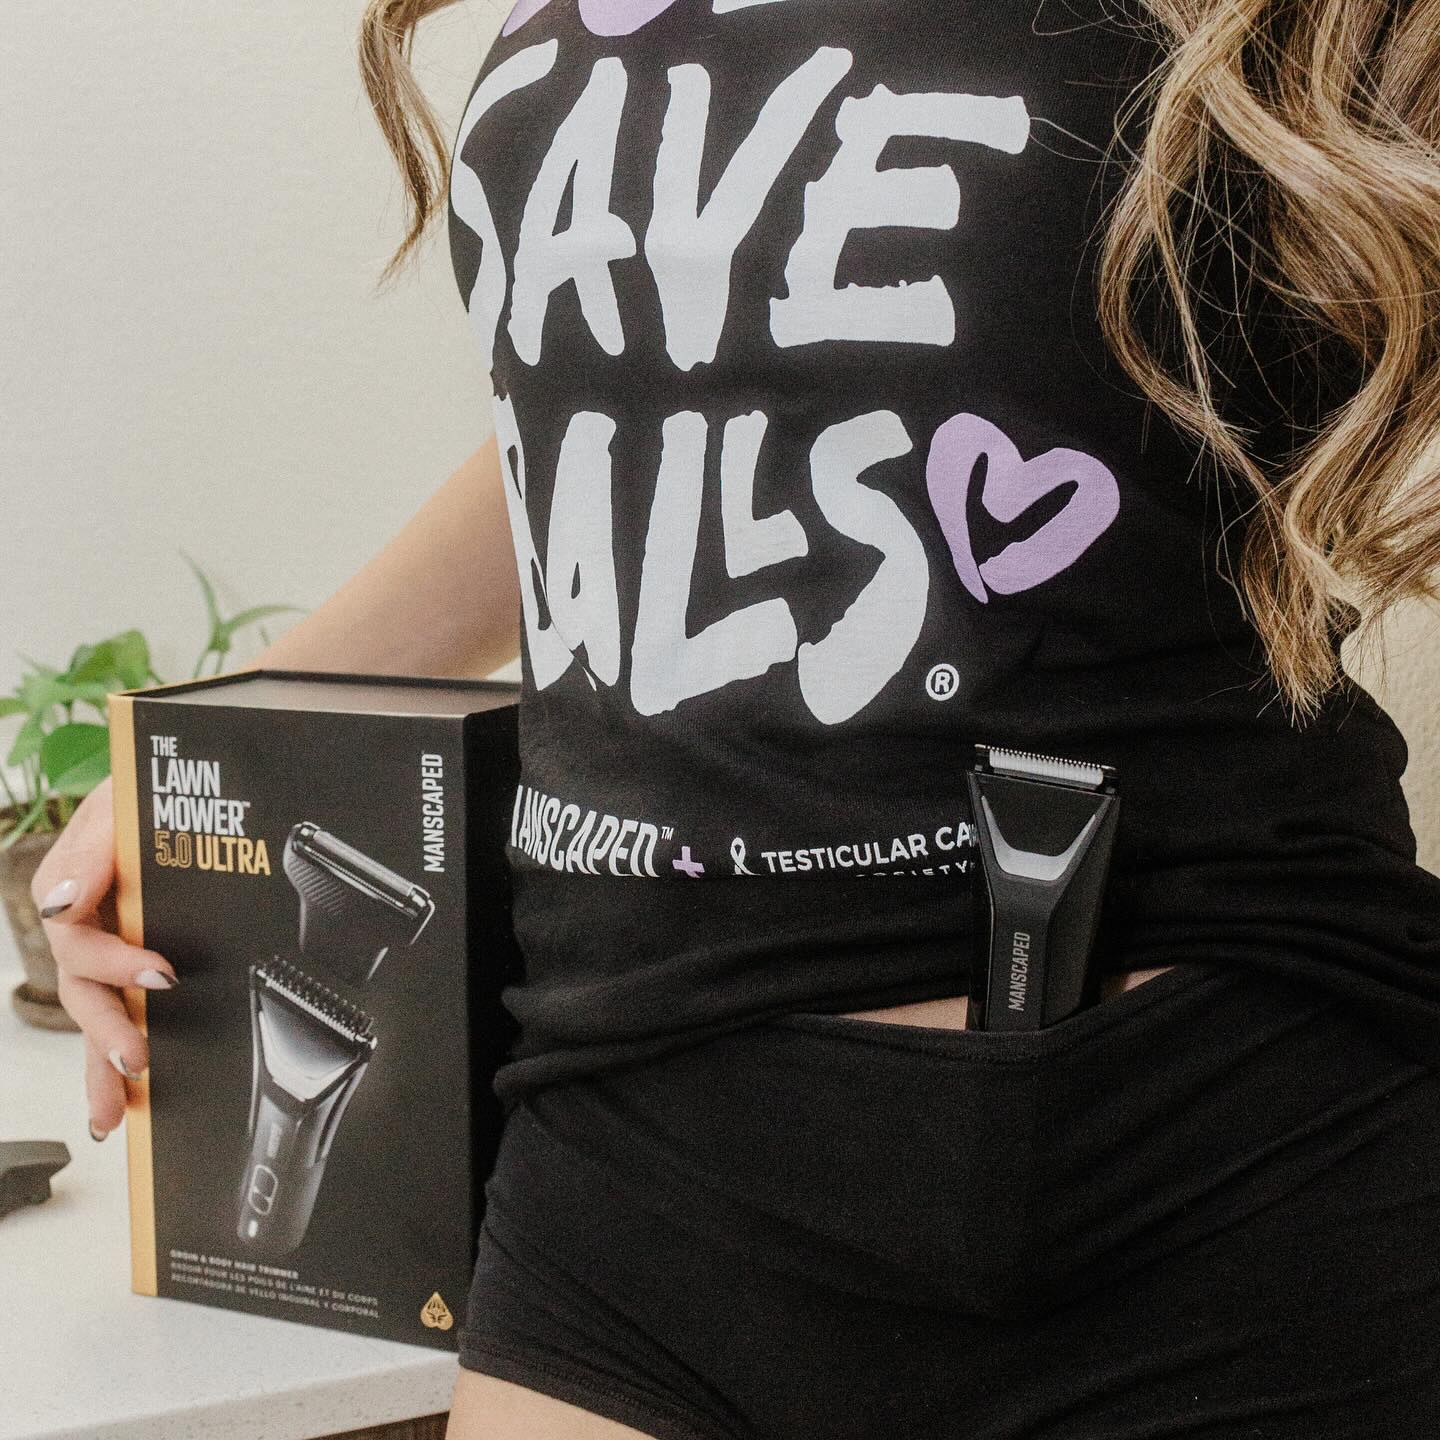 April might almost be over but Testicular Awareness is important all year long! Get 20% OFF with code RACHELH at Manscaped.com and make a donation to the @tcsociety at checkout. #shavetosave